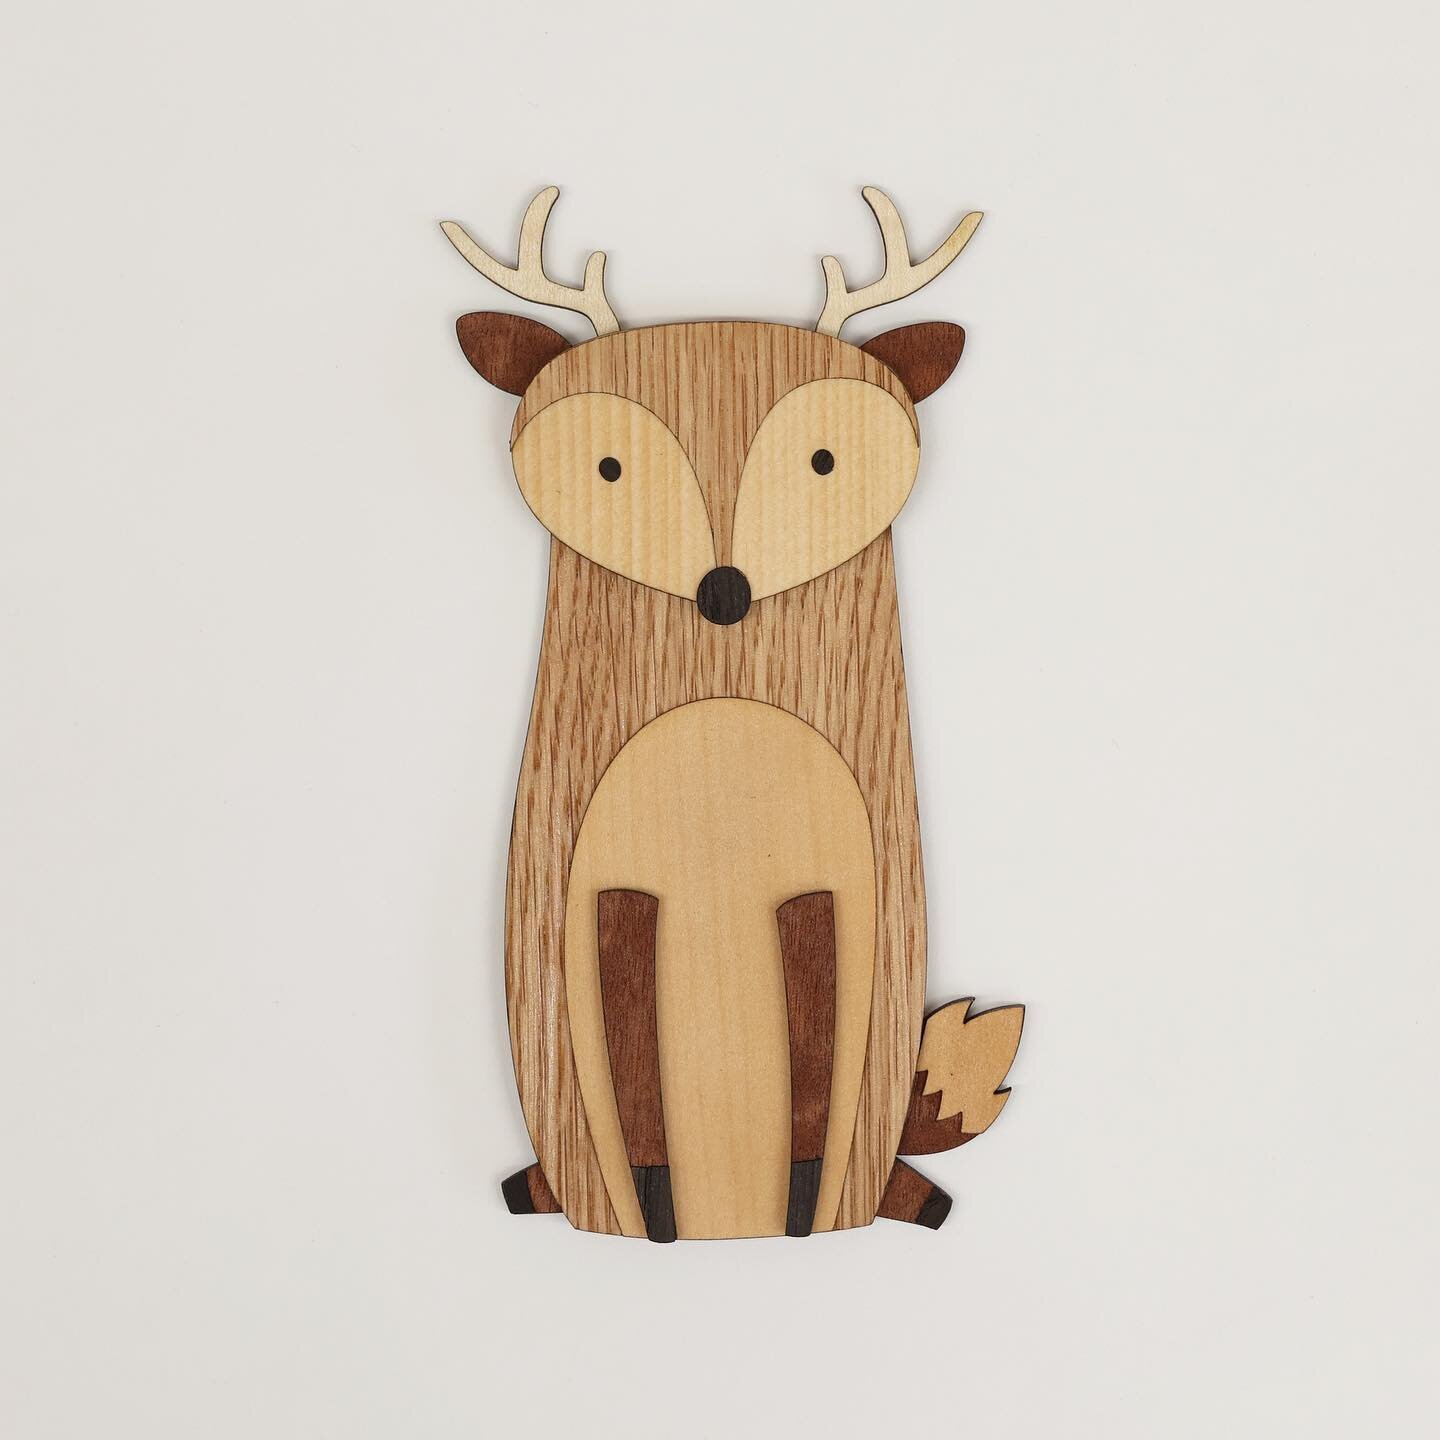 Thank you, @glowforge for inviting me to host your livestream yesterday. I had so much fun! Watch how I made these wooden animals for my daughter using custom veneered plywood on the Glowforge YouTube channel: https://youtu.be/EsgQuy70ZSI #glowforge 